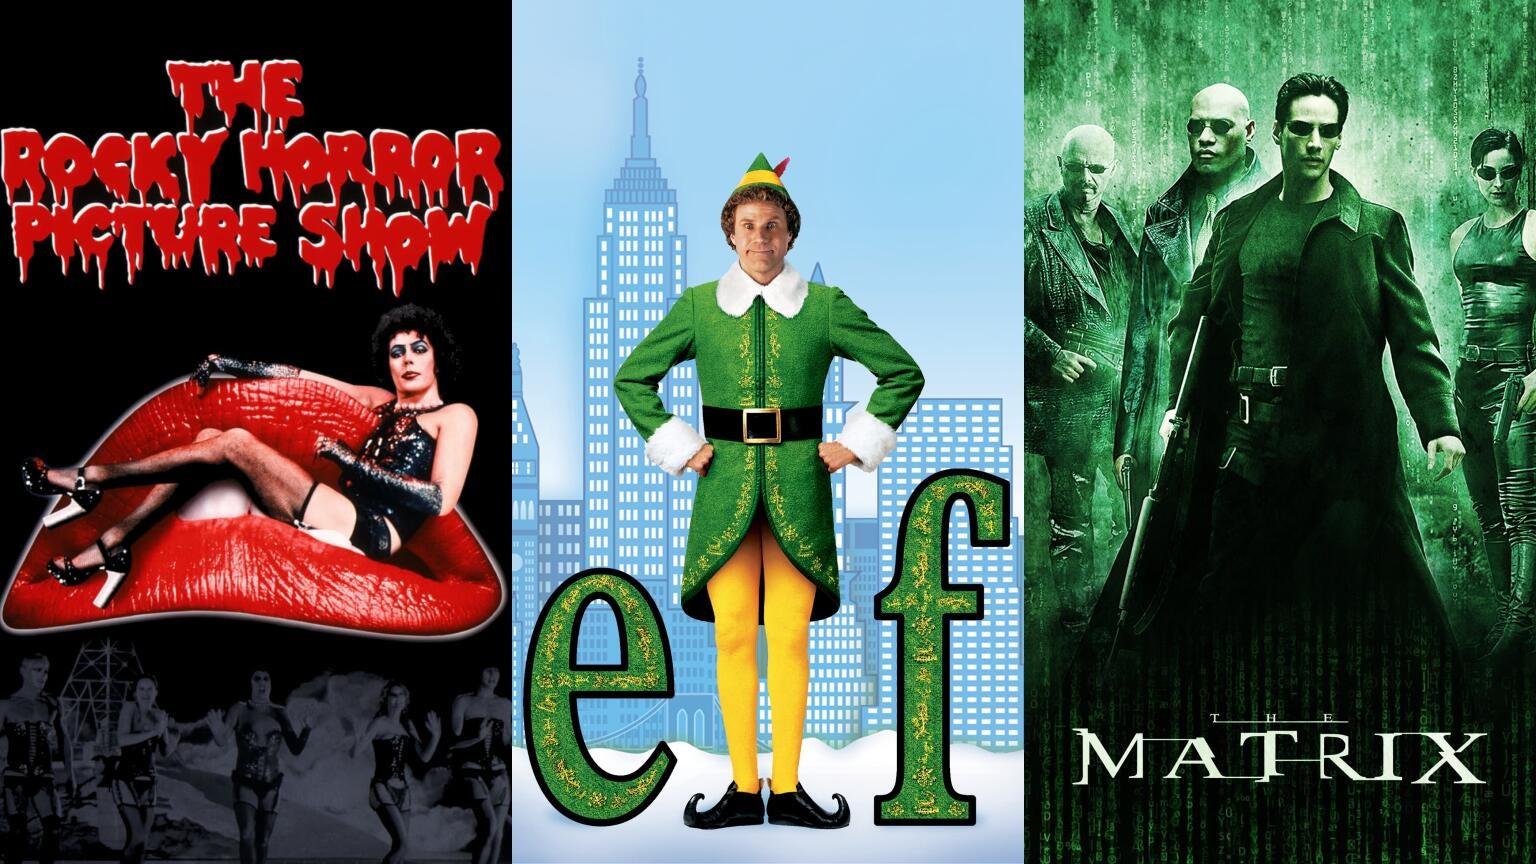 Movie posters for "The Rocky Horror Picture Show, "Elf," and "The Matrix"